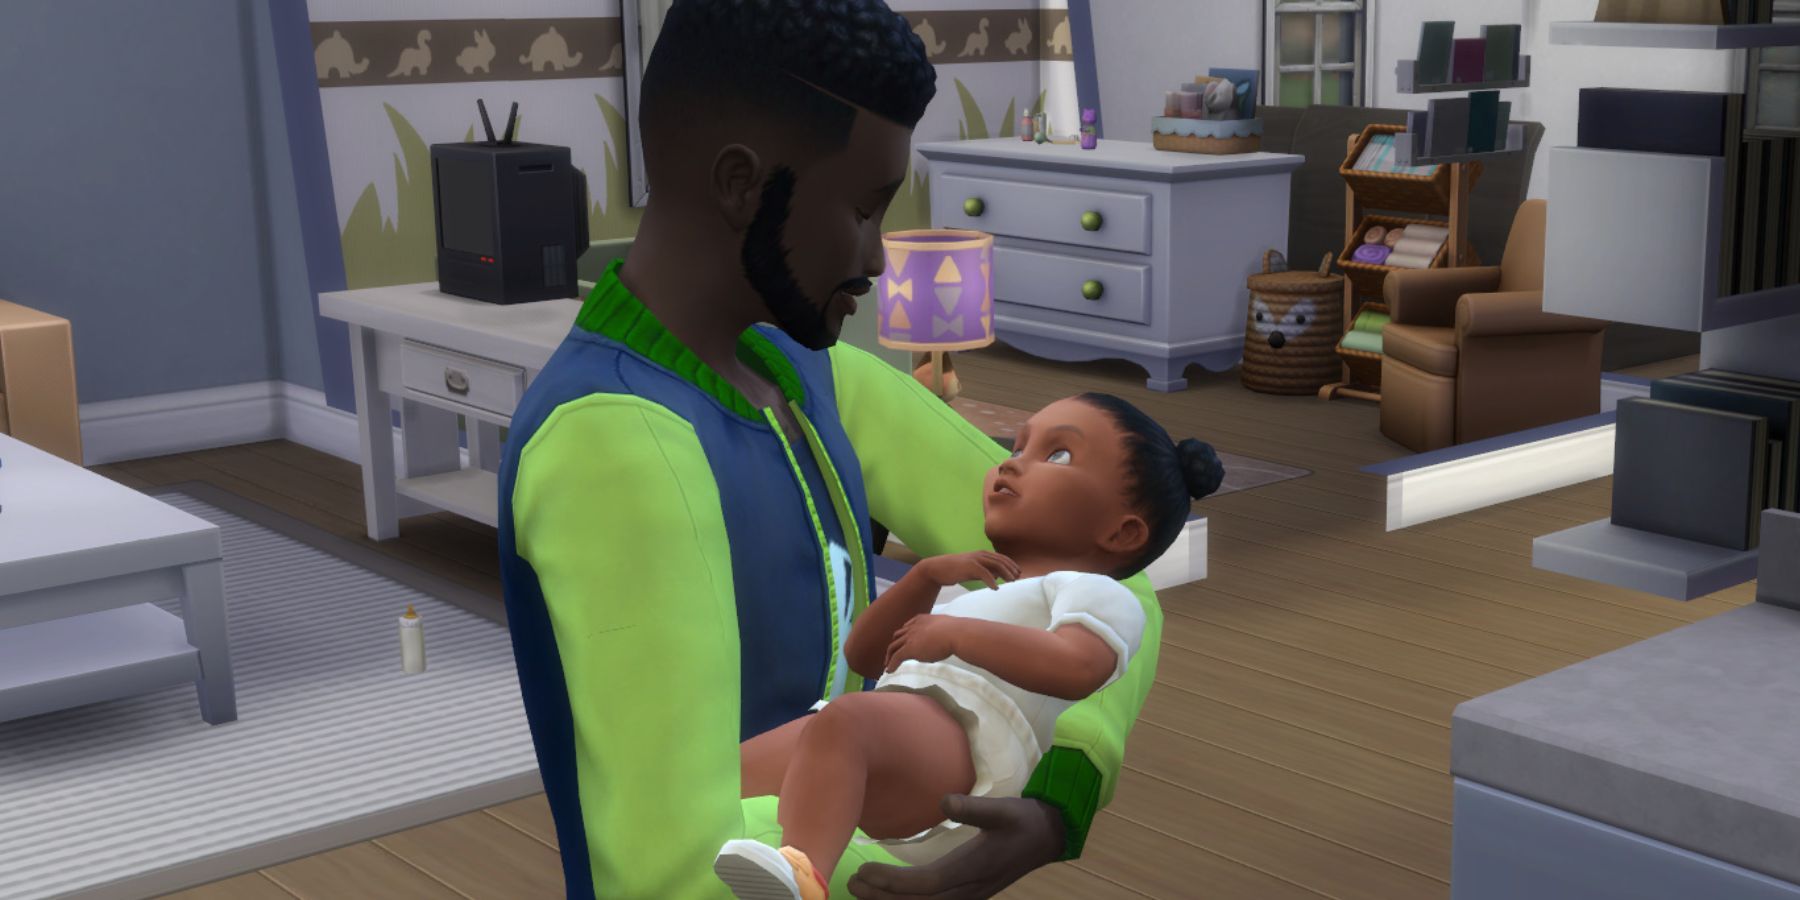 👶 ALL SIMS 4 PREGNANCY CHEATS 🍼, How To Force Labor, Force Twins and  MORE!